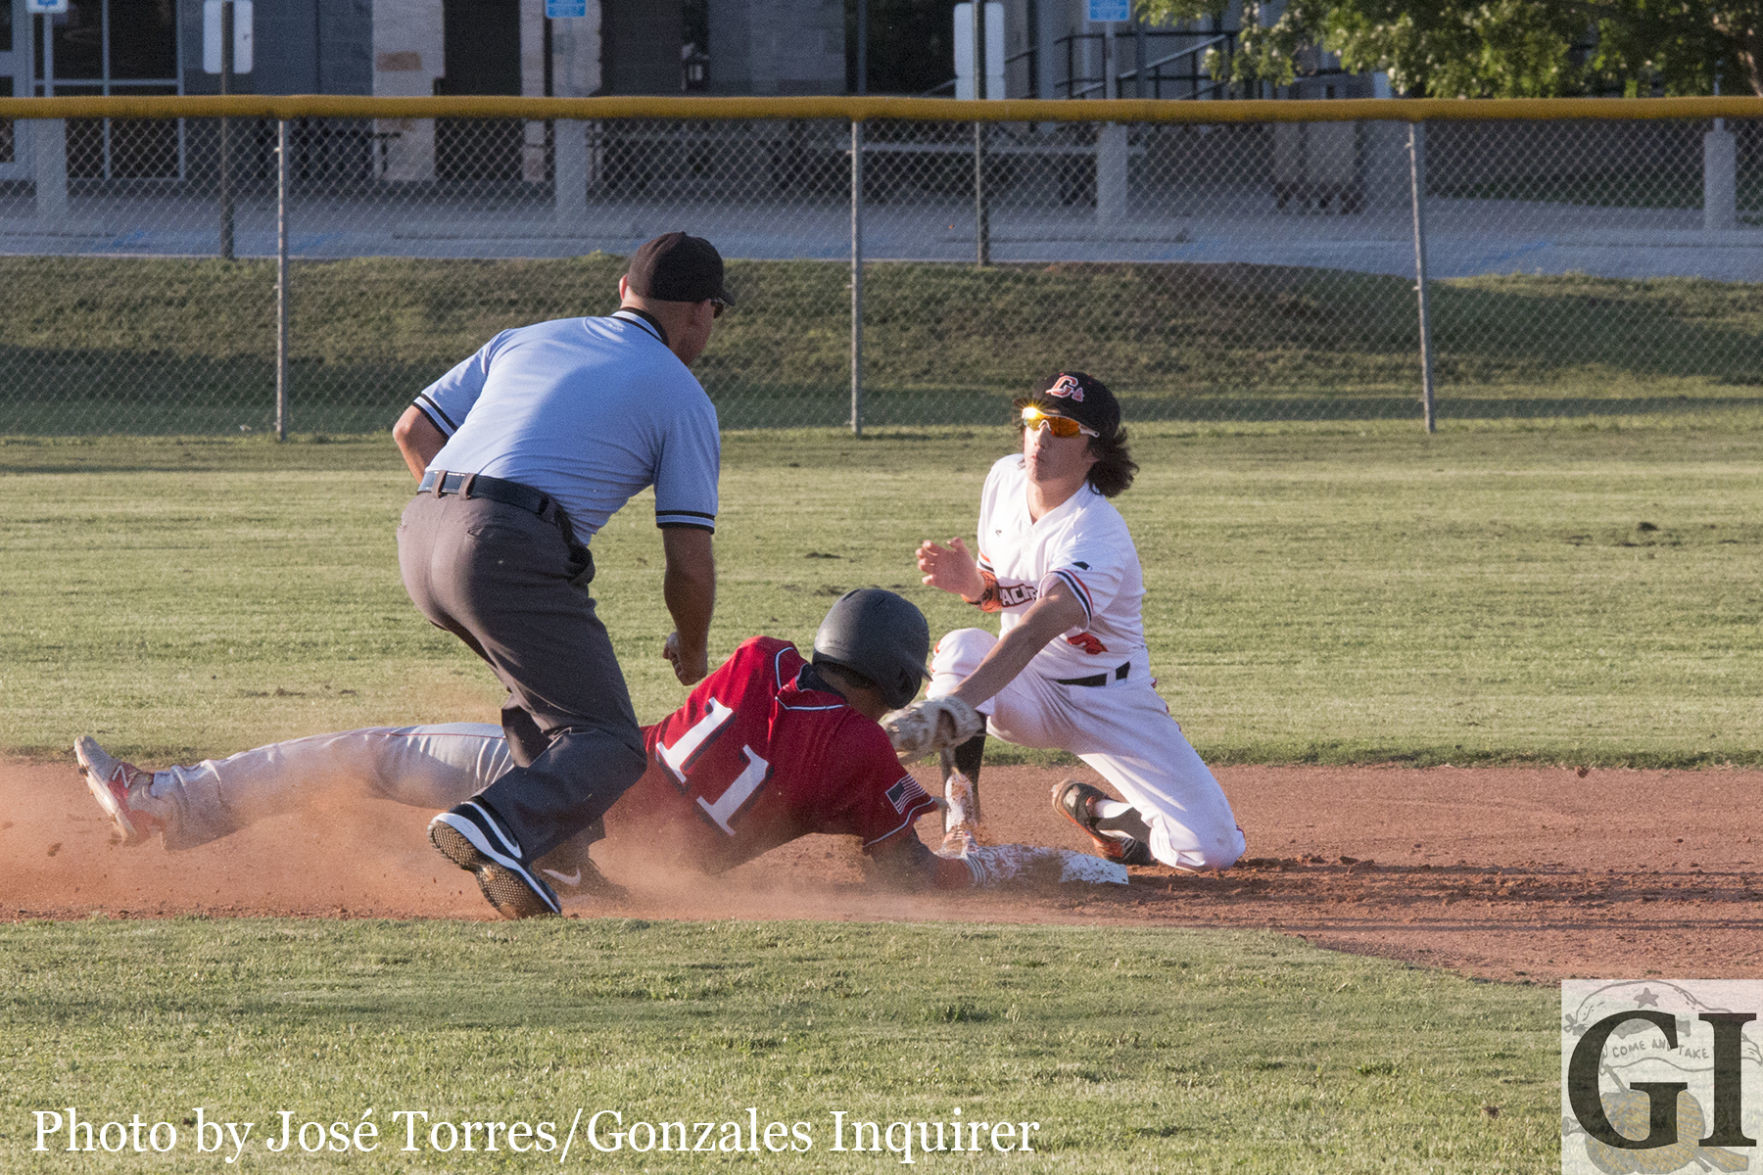 Play at second